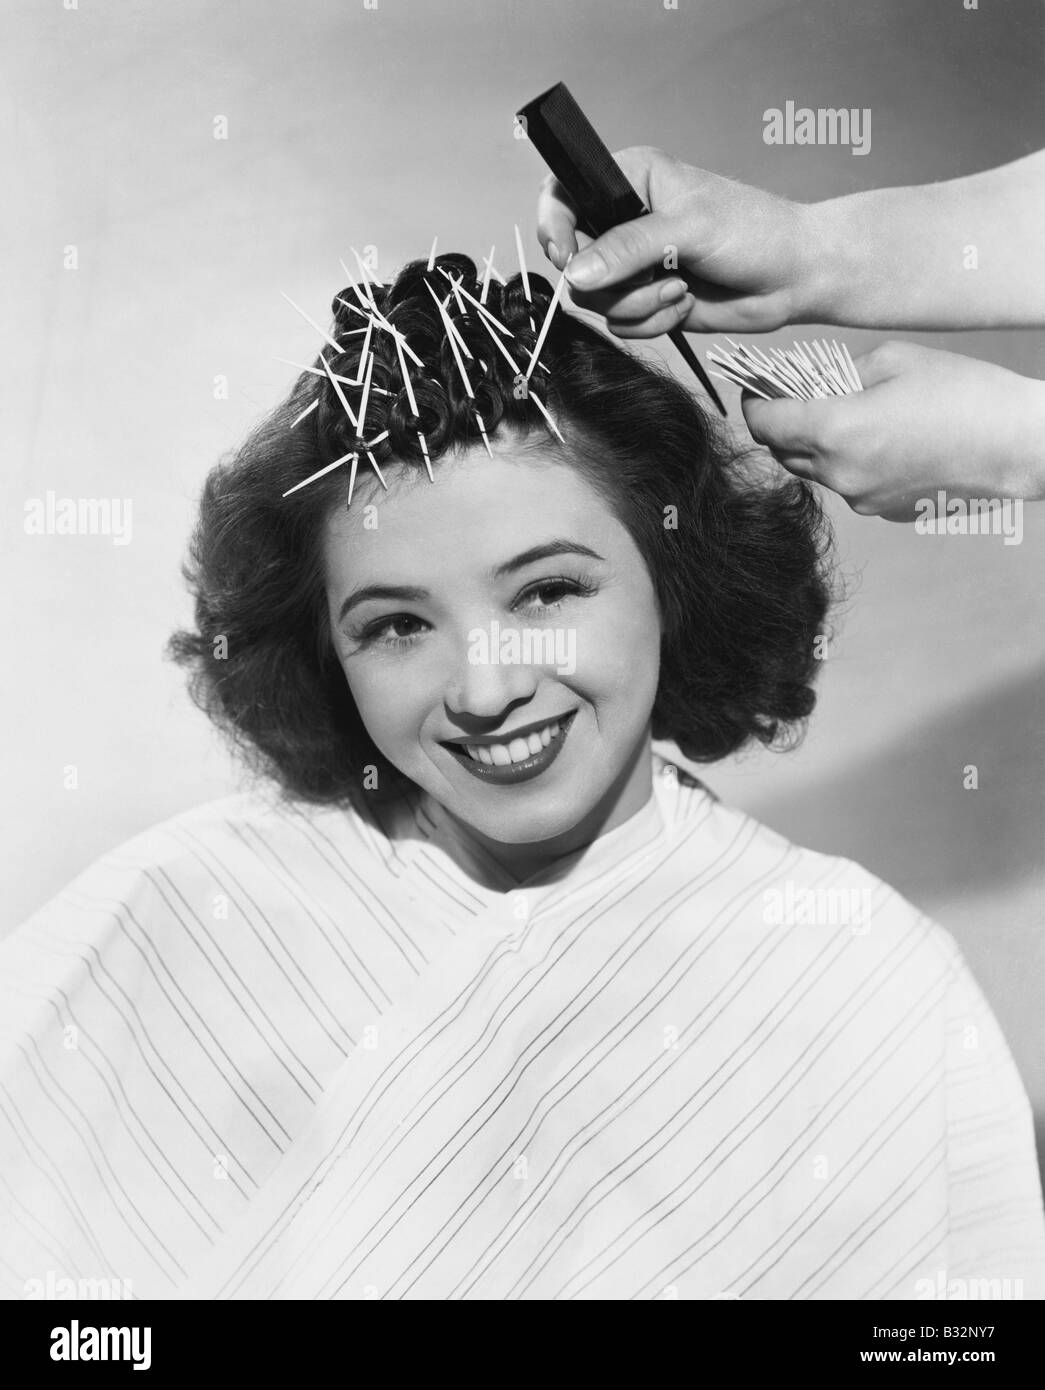 Portrait of woman having hair styled Stock Photo